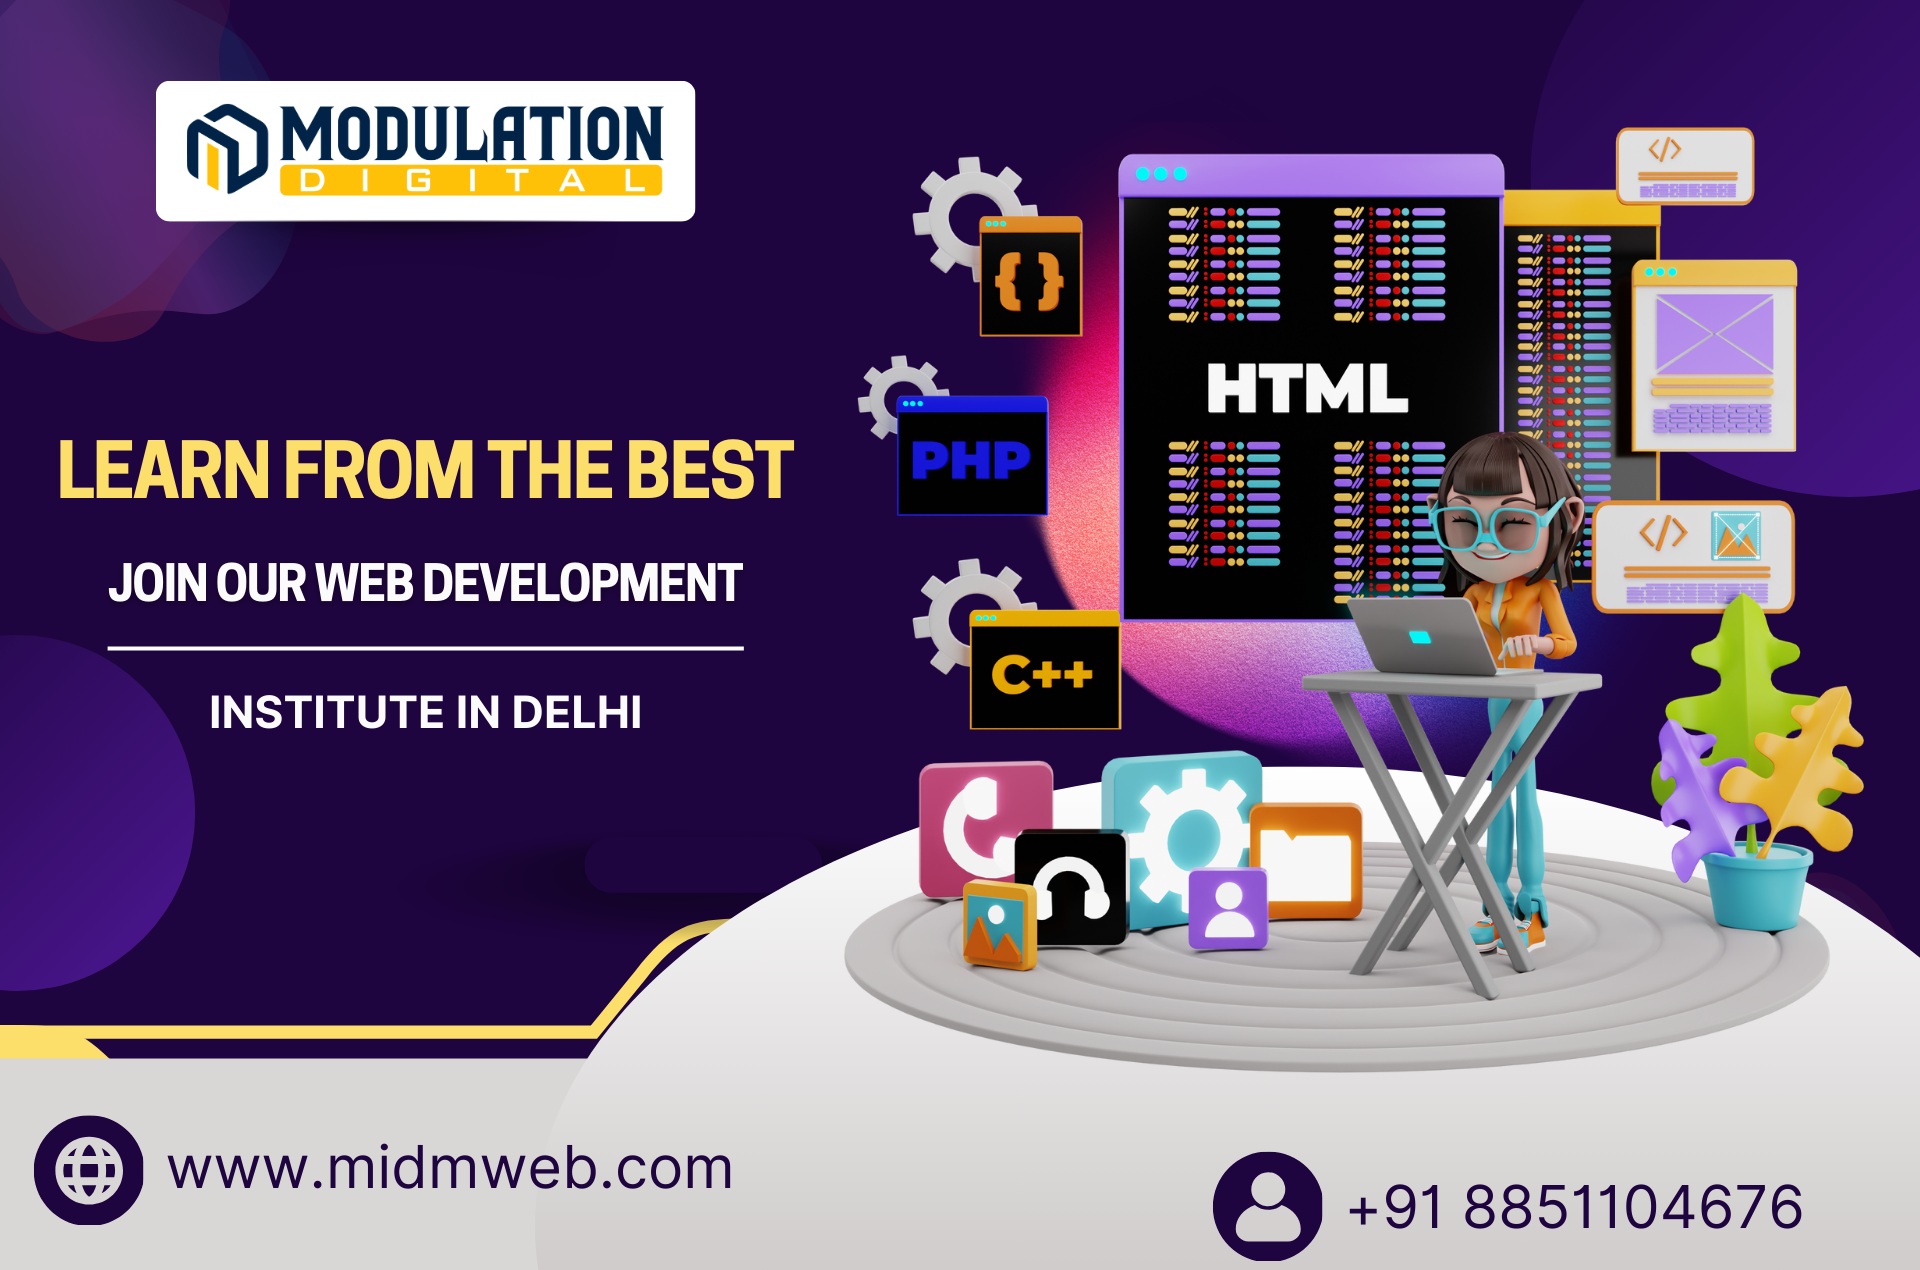 Is the Web Development Institute in Delhi the Right Choice for You?